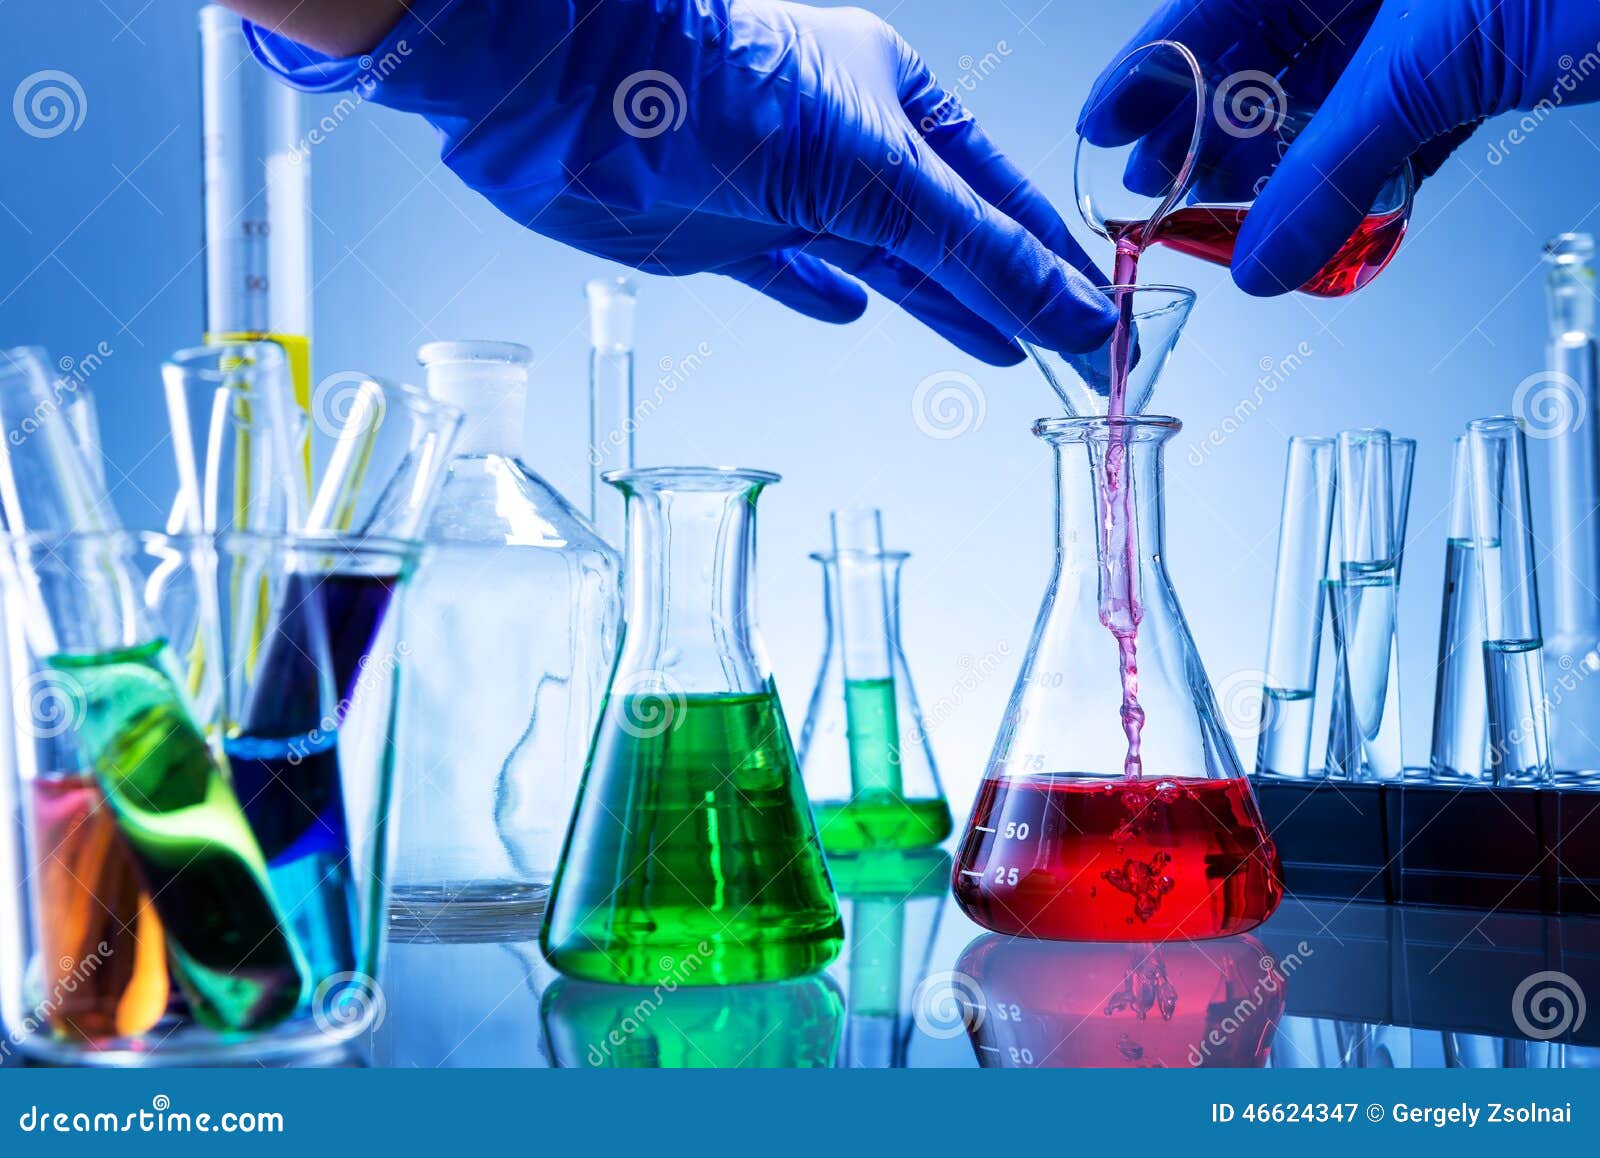 laboratory equipment, lots of glass filled with colorful liquids, hand poured